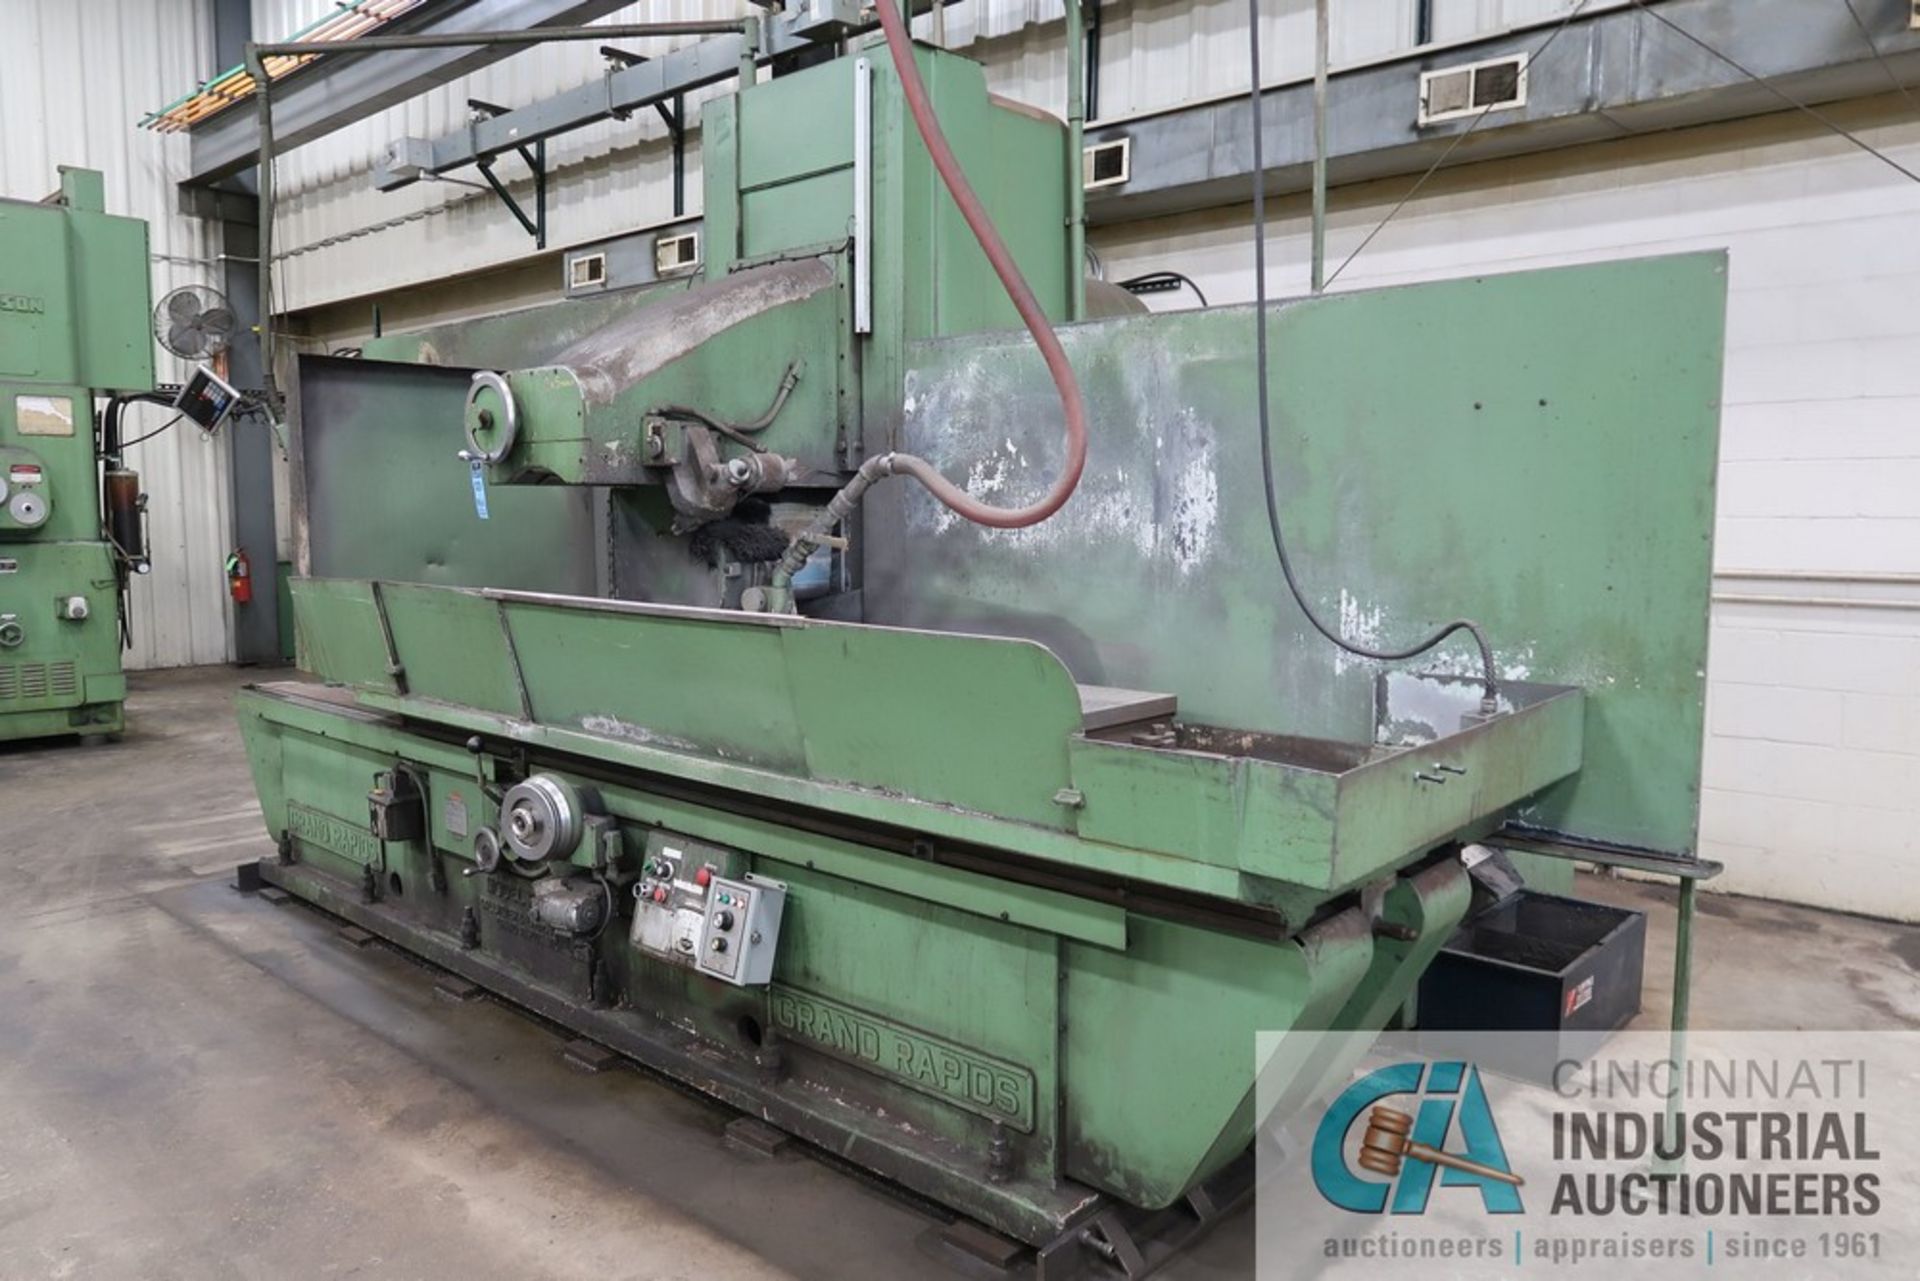 36" X 60' GALLMEYER AND LIVINGSTON MODLE F SURFACE GRINDER; S/N 1143672, WITH NEWALL E70-M DIGITAL